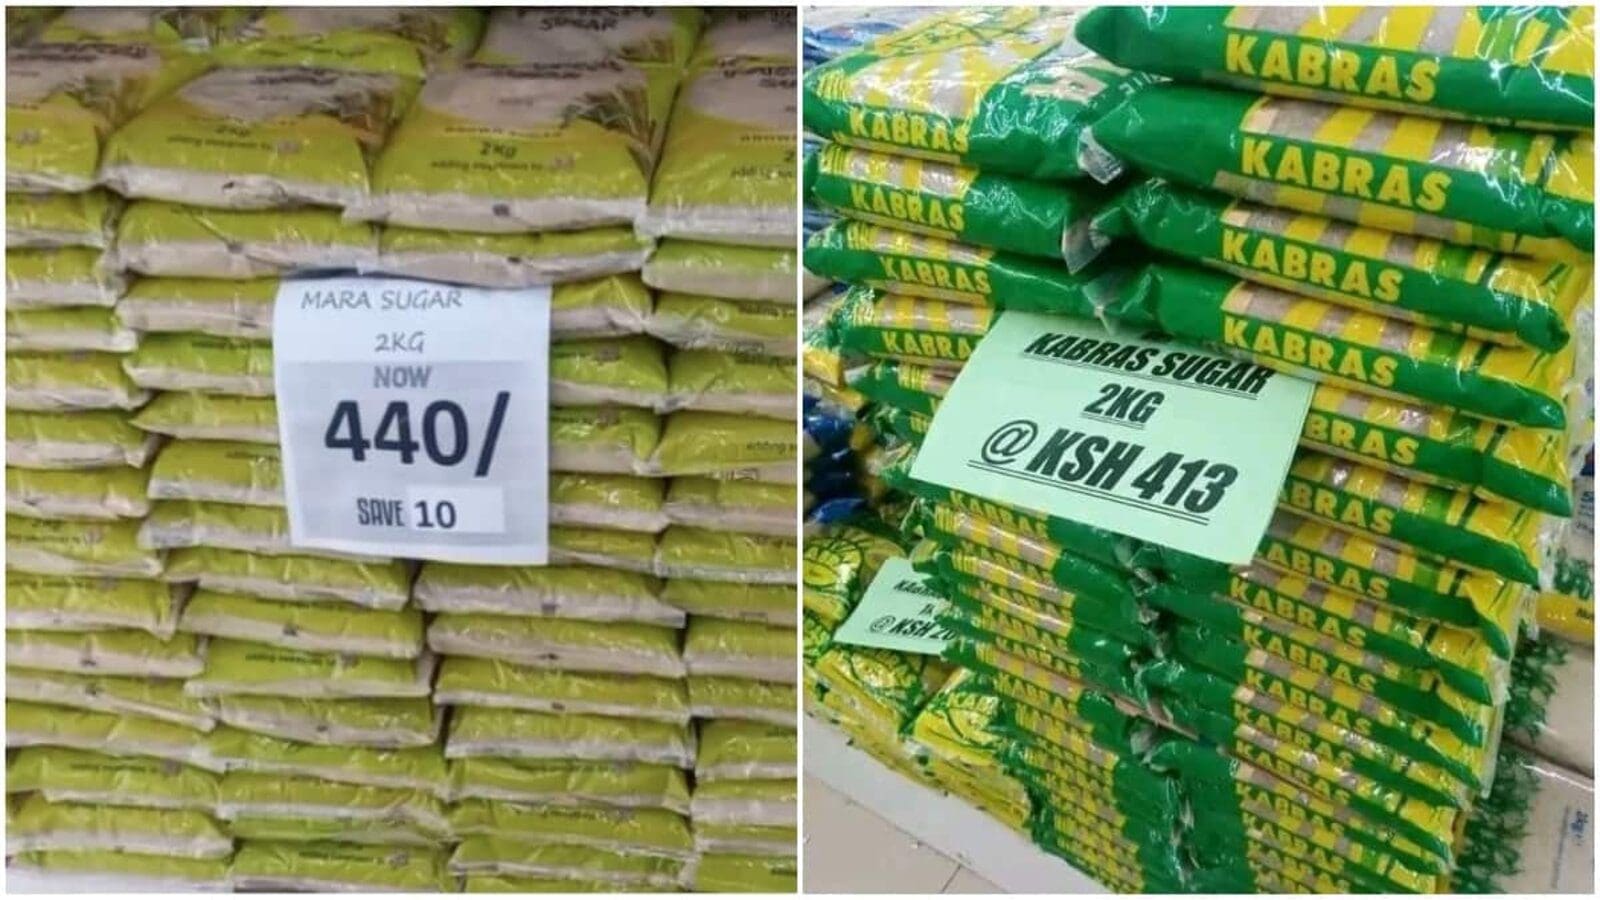 Kenya to import 180,000 more metric tons of sugar to curb surging prices